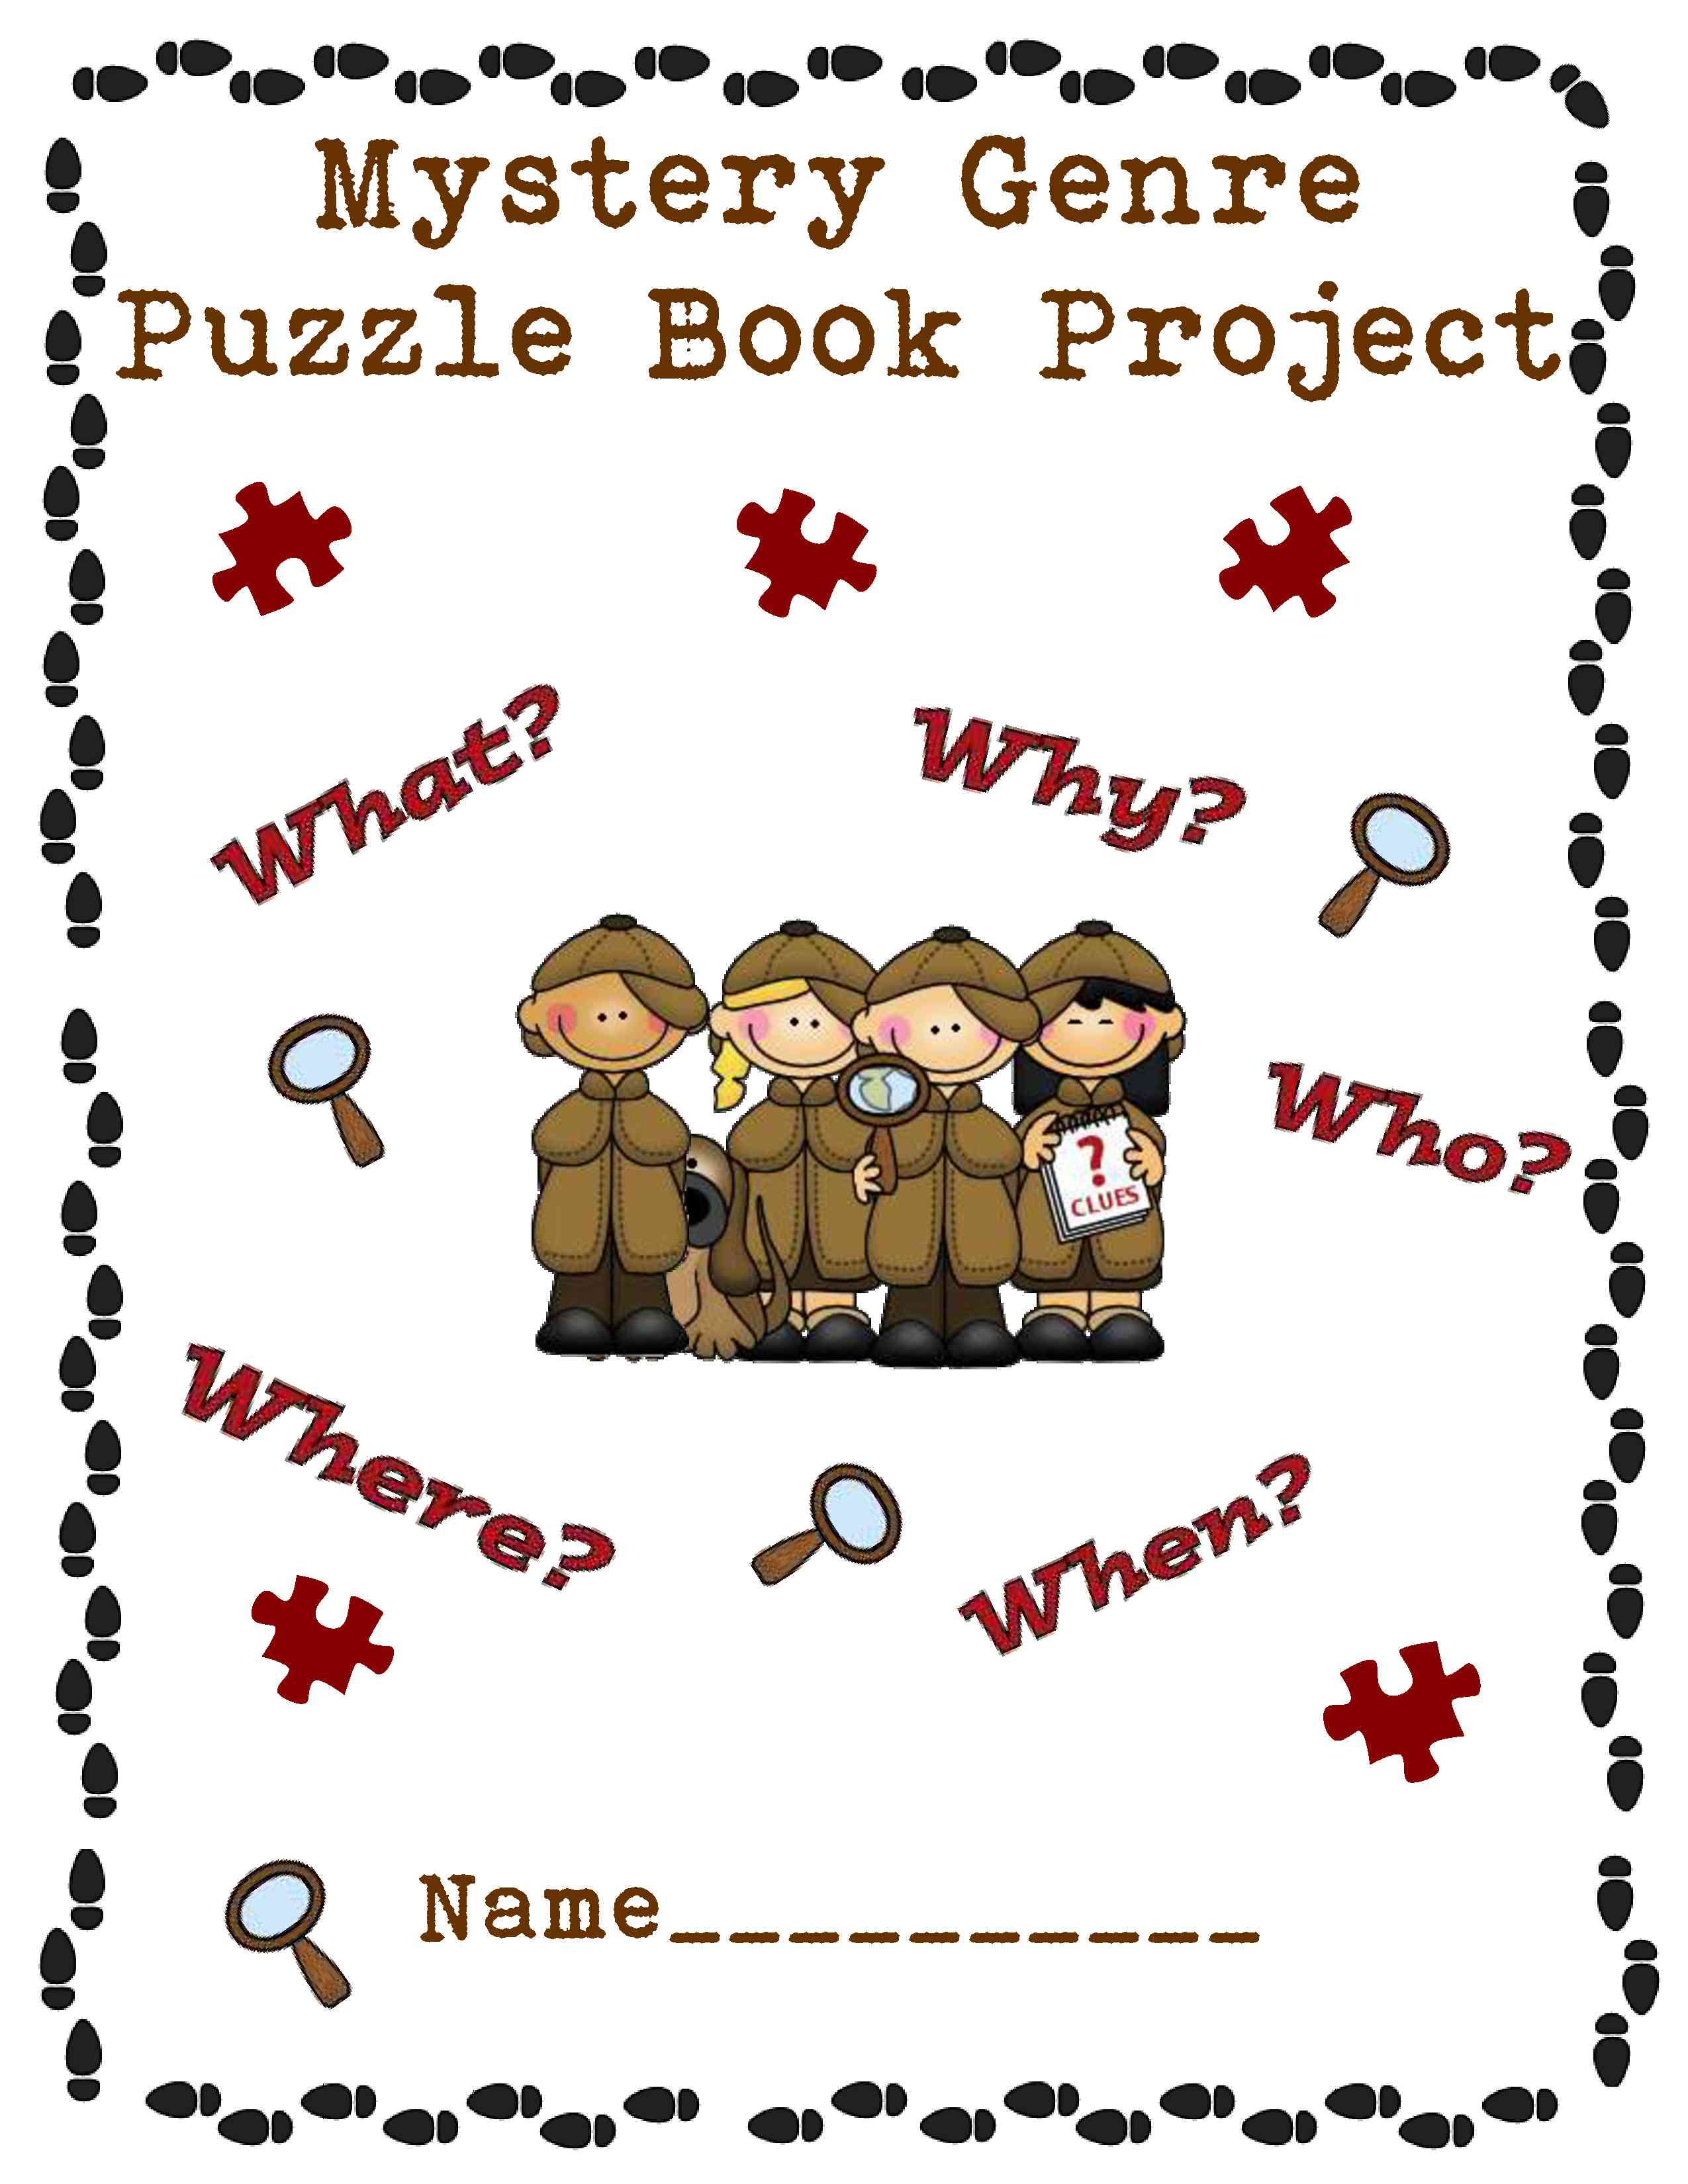 My Giant Jigsaw Puzzle Book Project | Scholastic.com